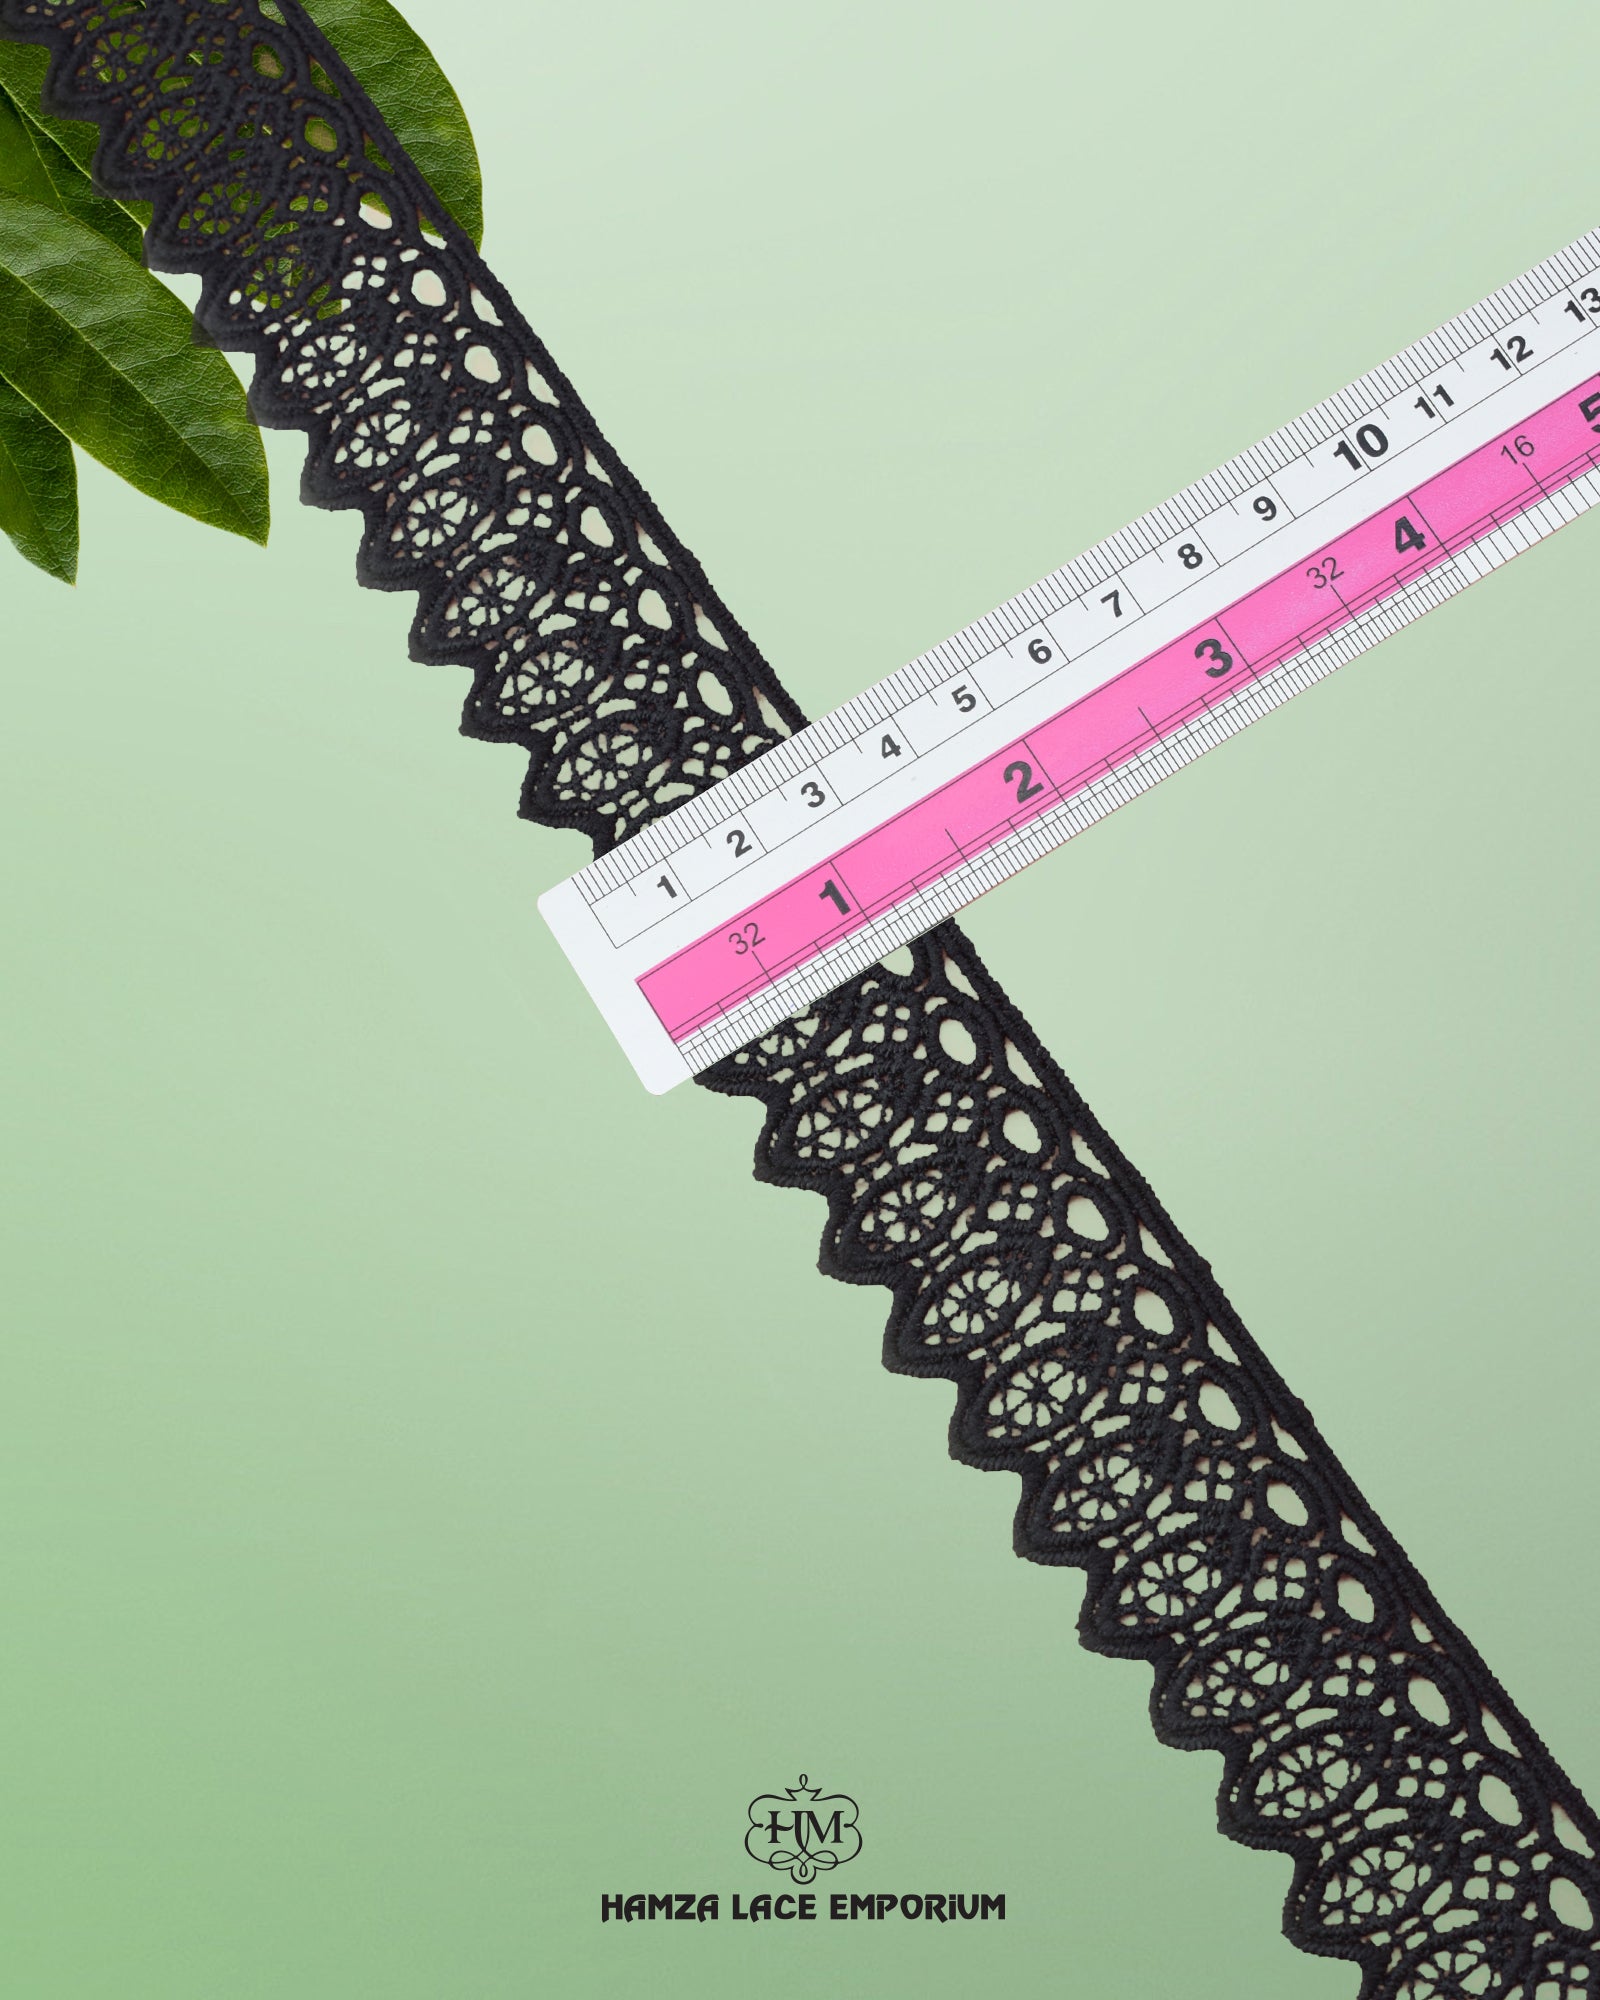 The size of the 'Edging Lace 23259' is shown as 1.5 inches